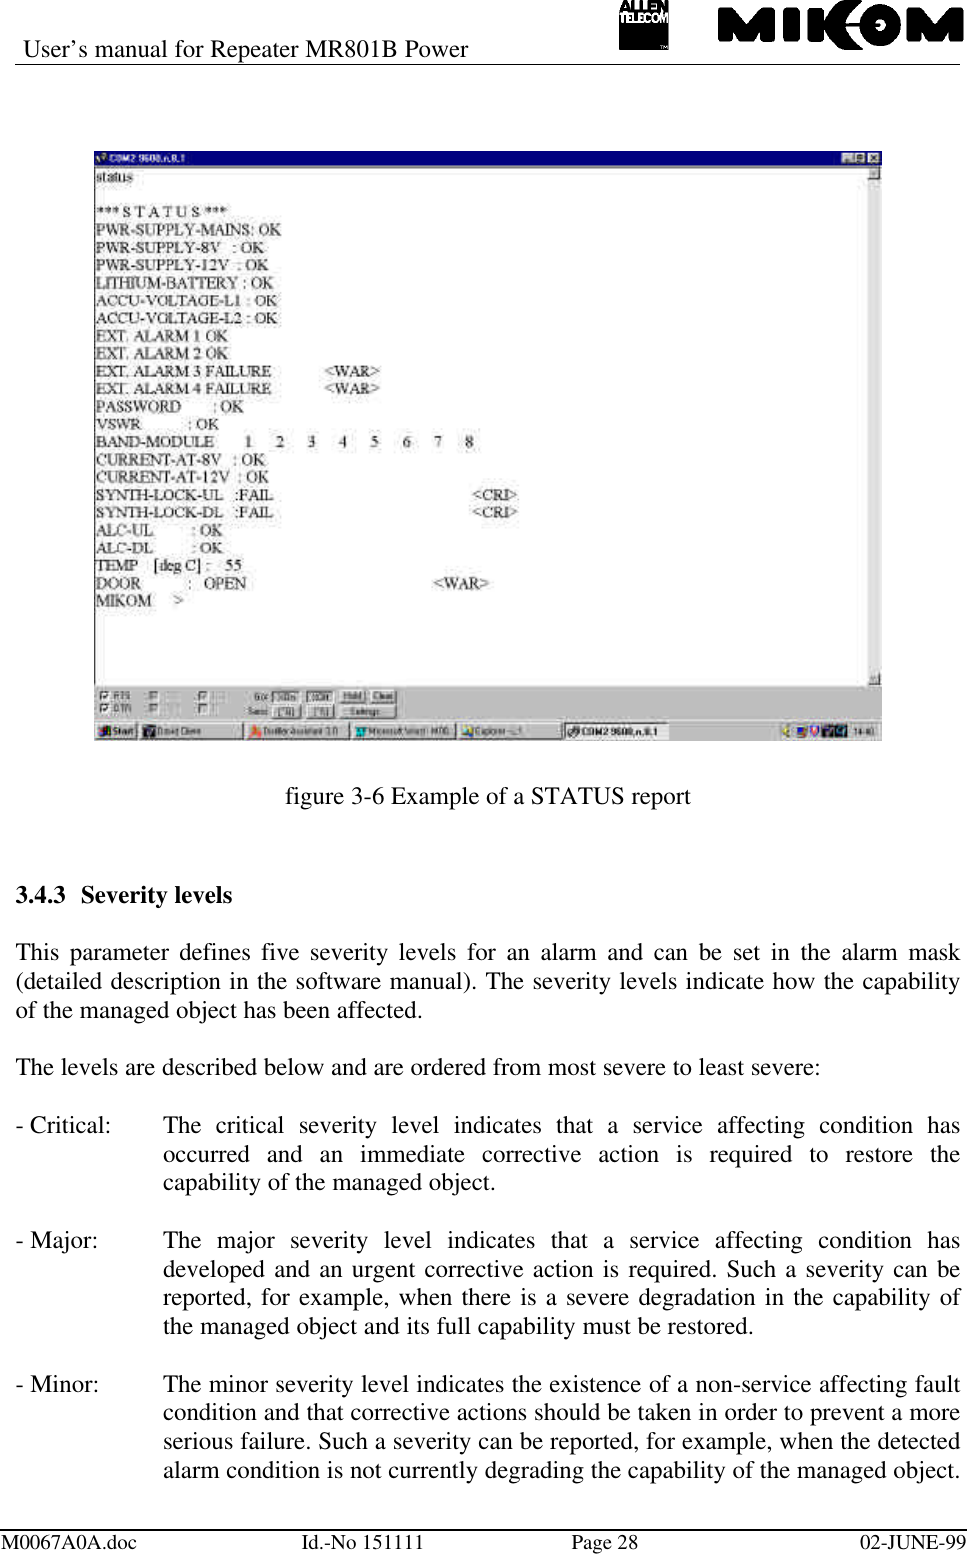 User’s manual for Repeater MR801B PowerM0067A0A.doc Id.-No 151111 Page 28 02-JUNE-99figure 3-6 Example of a STATUS report3.4.3 Severity levelsThis parameter defines five severity levels for an alarm and can be set in the alarm mask(detailed description in the software manual). The severity levels indicate how the capabilityof the managed object has been affected.The levels are described below and are ordered from most severe to least severe:- Critical: The critical severity level indicates that a service affecting condition hasoccurred and an immediate corrective action is required to restore thecapability of the managed object.- Major: The major severity level indicates that a service affecting condition hasdeveloped and an urgent corrective action is required. Such a severity can bereported, for example, when there is a severe degradation in the capability ofthe managed object and its full capability must be restored.- Minor: The minor severity level indicates the existence of a non-service affecting faultcondition and that corrective actions should be taken in order to prevent a moreserious failure. Such a severity can be reported, for example, when the detectedalarm condition is not currently degrading the capability of the managed object.